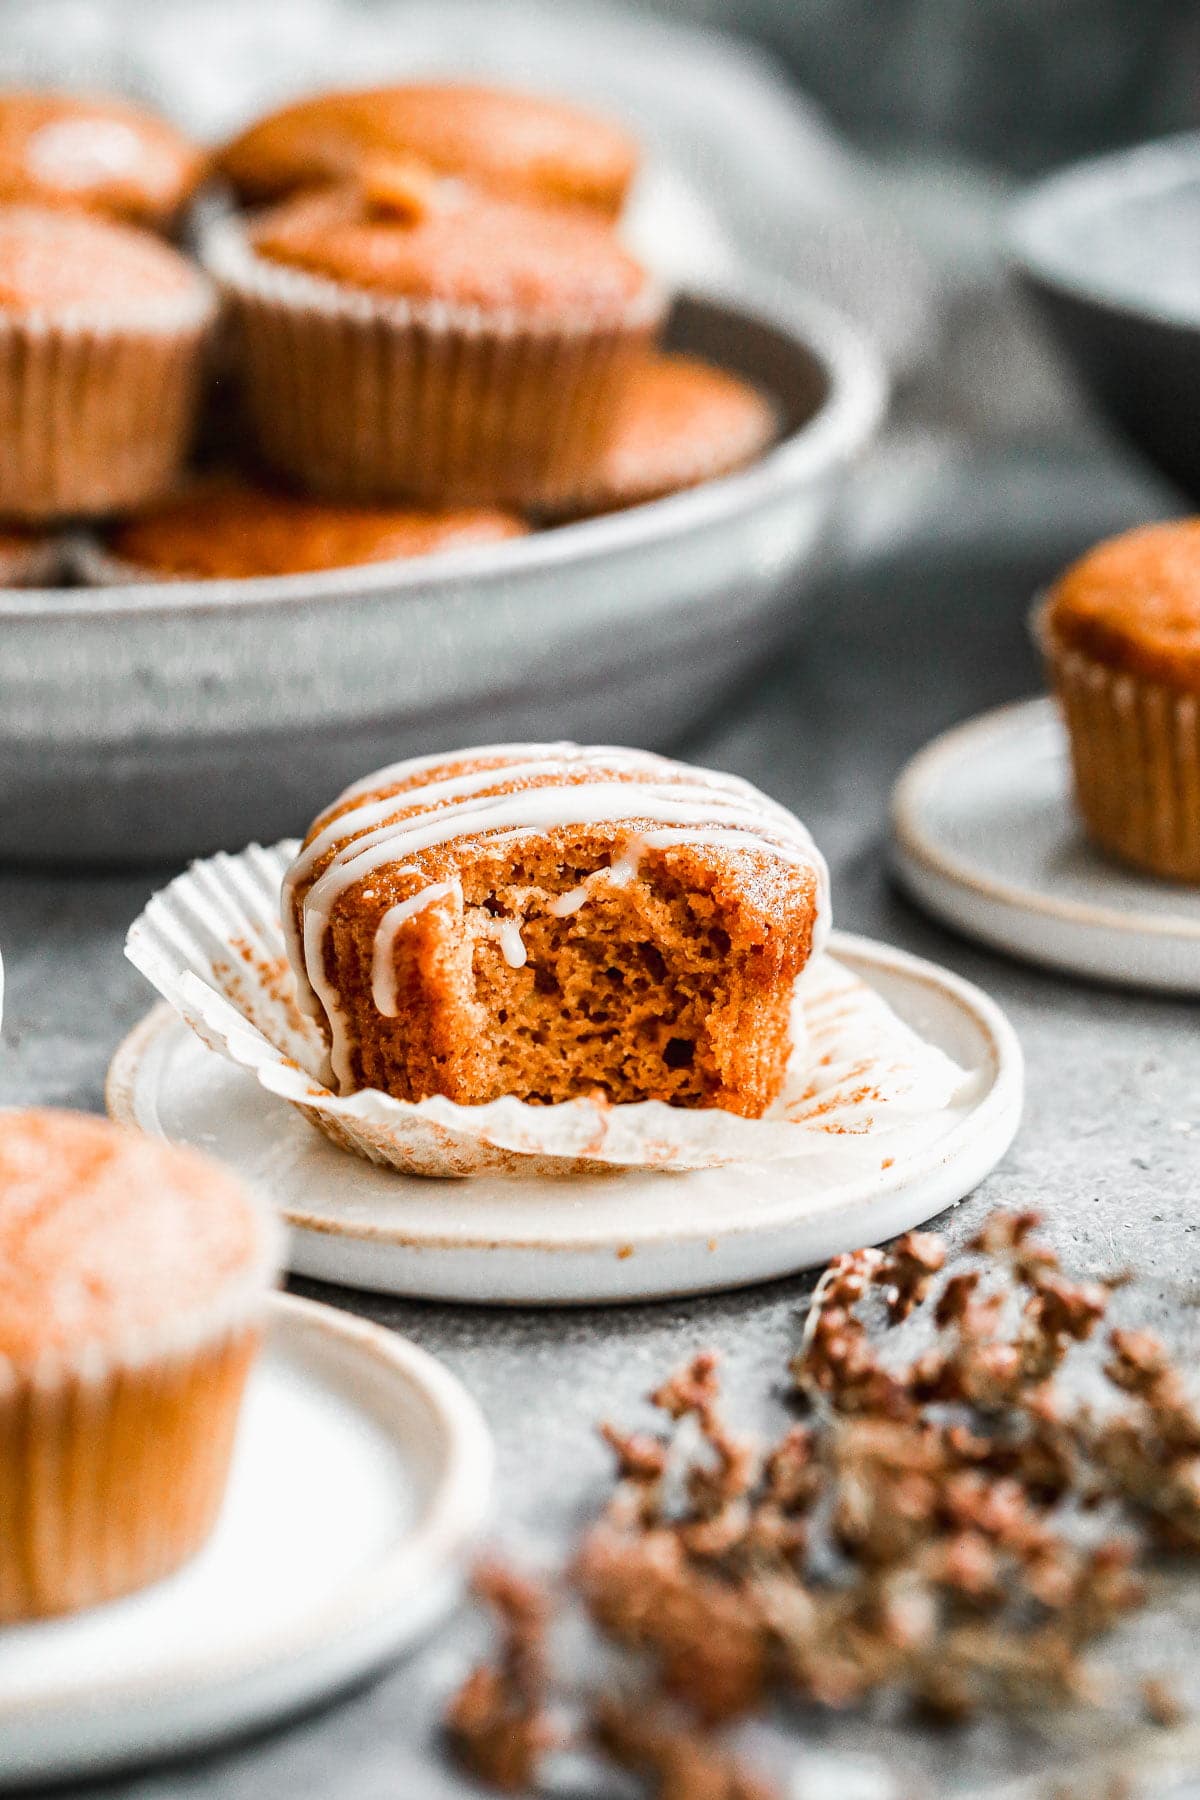 Our Easy Pumpkin Muffin Recipe is full of pumpkin flavor with notes of apple cider and the most tender, moist interior. Hands down the best pumpkin muffin recipe you'll make this fall! We drizzle the tops with a two-ingredient apple cider glaze but these are just as scrumptious plain.&nbsp;